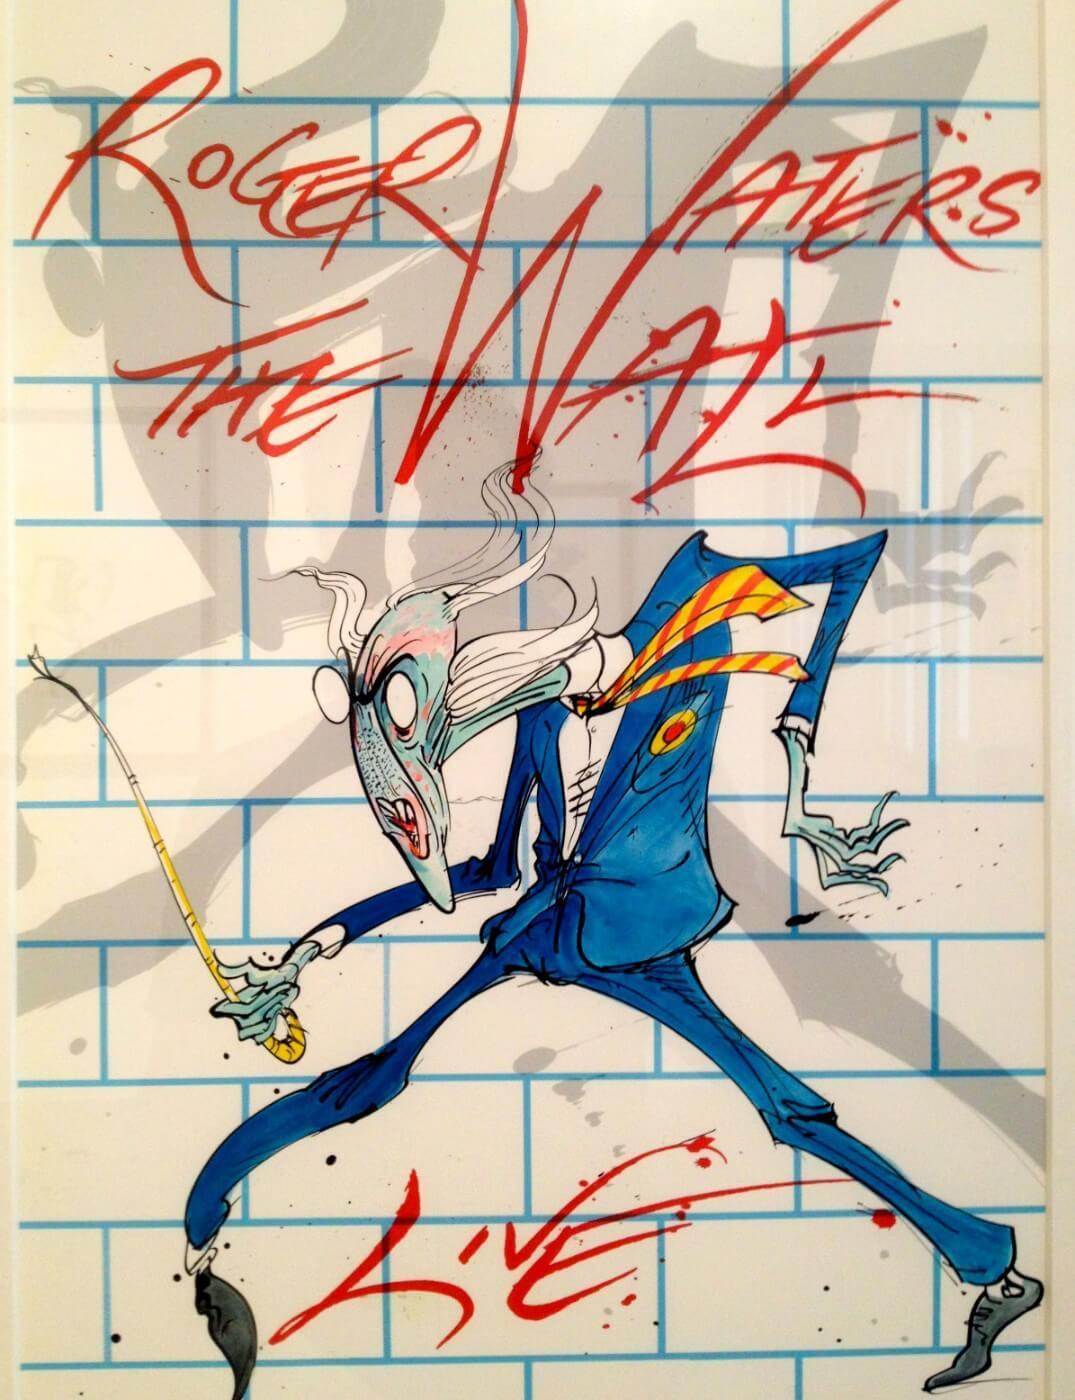 Pink Floyd - The Wall - Roger Waters Concert Poster - Classic